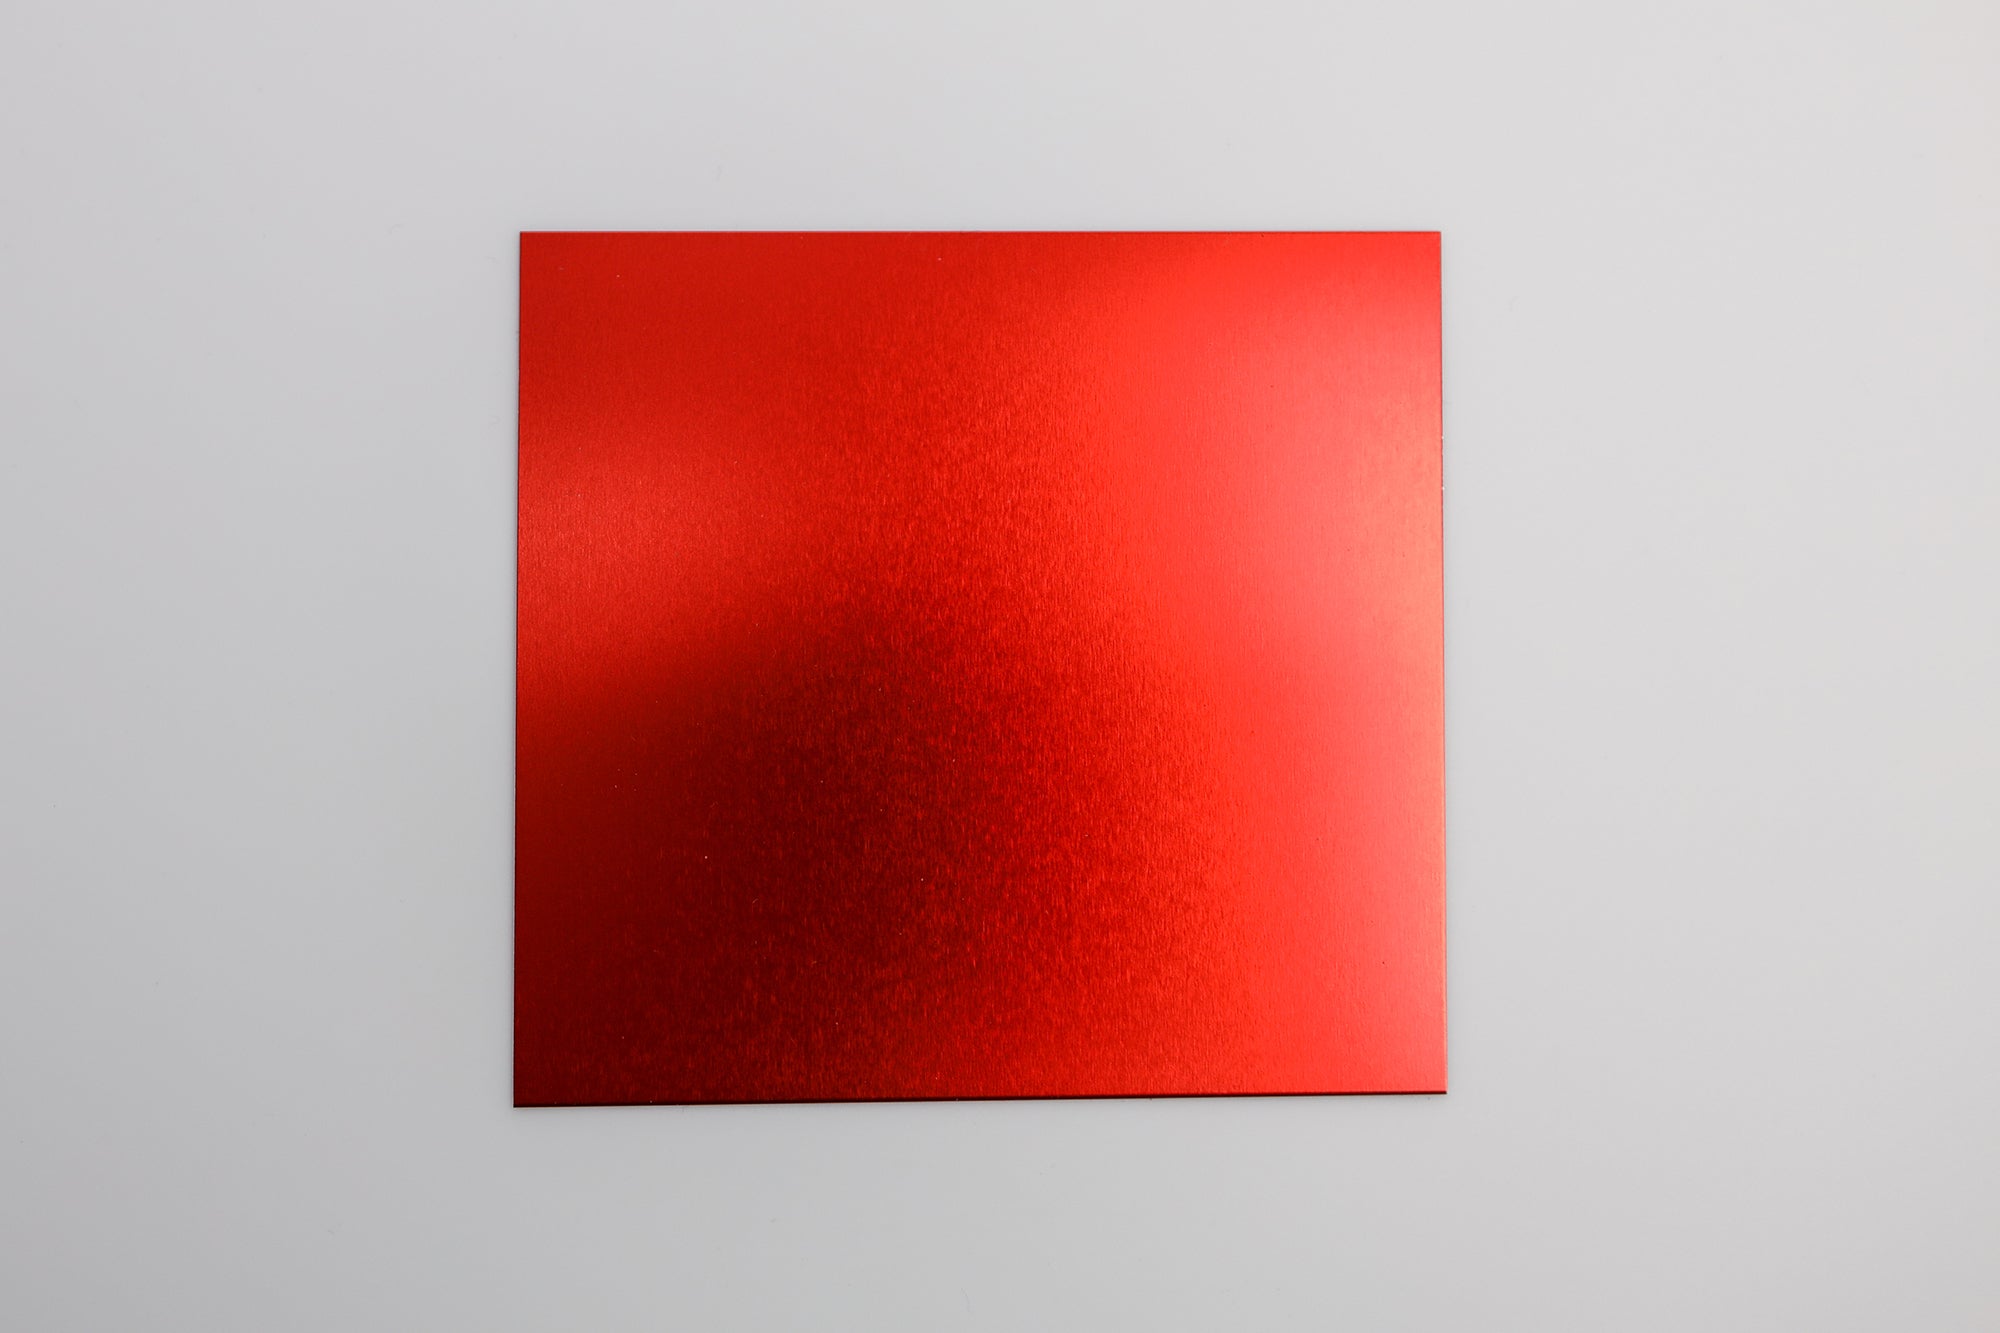 Indoor Anodised Aluminium Sheet Red 570W x 390H x 0.5mm or 1mm Thickness